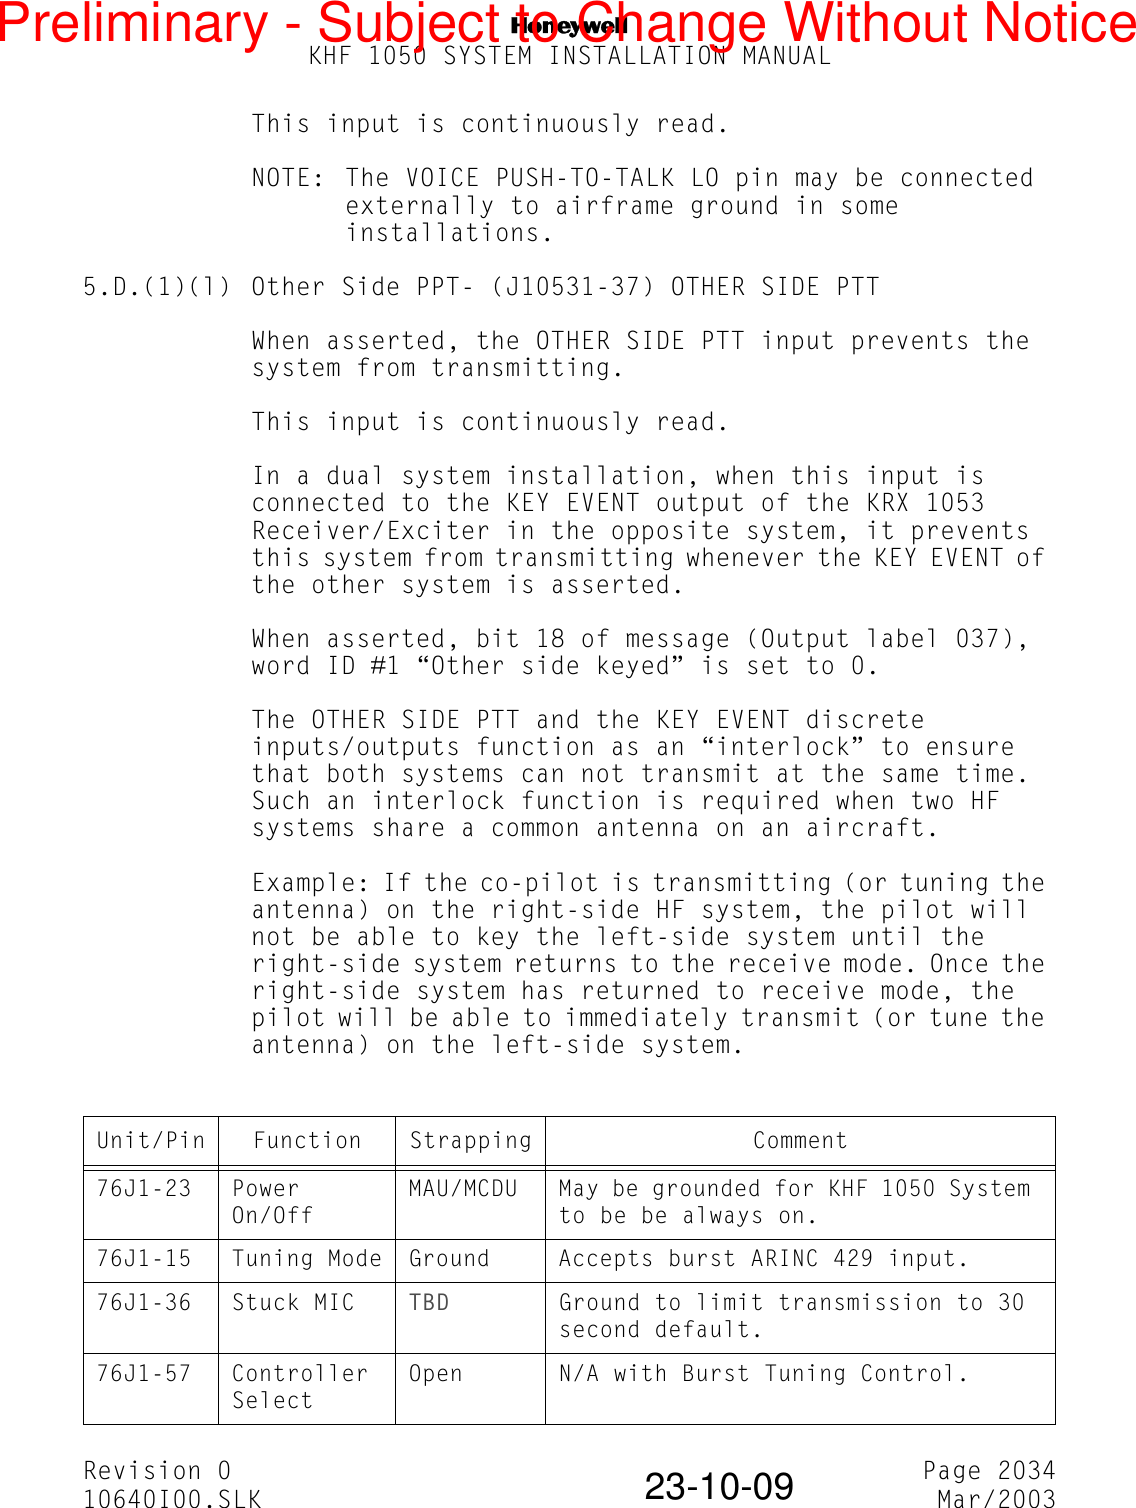 NKHF 1050 SYSTEM INSTALLATION MANUALRevision 0 Page 203410640I00.SLK Mar/200323-10-09This input is continuously read.NOTE: The VOICE PUSH-TO-TALK LO pin may be connected externally to airframe ground in some installations.5.D.(1)(l) Other Side PPT- (J10531-37) OTHER SIDE PTTWhen asserted, the OTHER SIDE PTT input prevents the system from transmitting.This input is continuously read.In a dual system installation, when this input is connected to the KEY EVENT output of the KRX 1053 Receiver/Exciter in the opposite system, it prevents this system from transmitting whenever the KEY EVENT of the other system is asserted.When asserted, bit 18 of message (Output label 037), word ID #1 “Other side keyed” is set to 0.The OTHER SIDE PTT and the KEY EVENT discrete inputs/outputs function as an “interlock” to ensure that both systems can not transmit at the same time. Such an interlock function is required when two HF systems share a common antenna on an aircraft.Example: If the co-pilot is transmitting (or tuning the antenna) on the right-side HF system, the pilot will not be able to key the left-side system until the right-side system returns to the receive mode. Once the right-side system has returned to receive mode, the pilot will be able to immediately transmit (or tune the antenna) on the left-side system.Unit/Pin Function Strapping Comment76J1-23 Power On/OffMAU/MCDU May be grounded for KHF 1050 System to be be always on.76J1-15 Tuning Mode Ground Accepts burst ARINC 429 input.76J1-36 Stuck MIC TBD Ground to limit transmission to 30 second default.76J1-57 Controller SelectOpen N/A with Burst Tuning Control.Preliminary - Subject to Change Without Notice